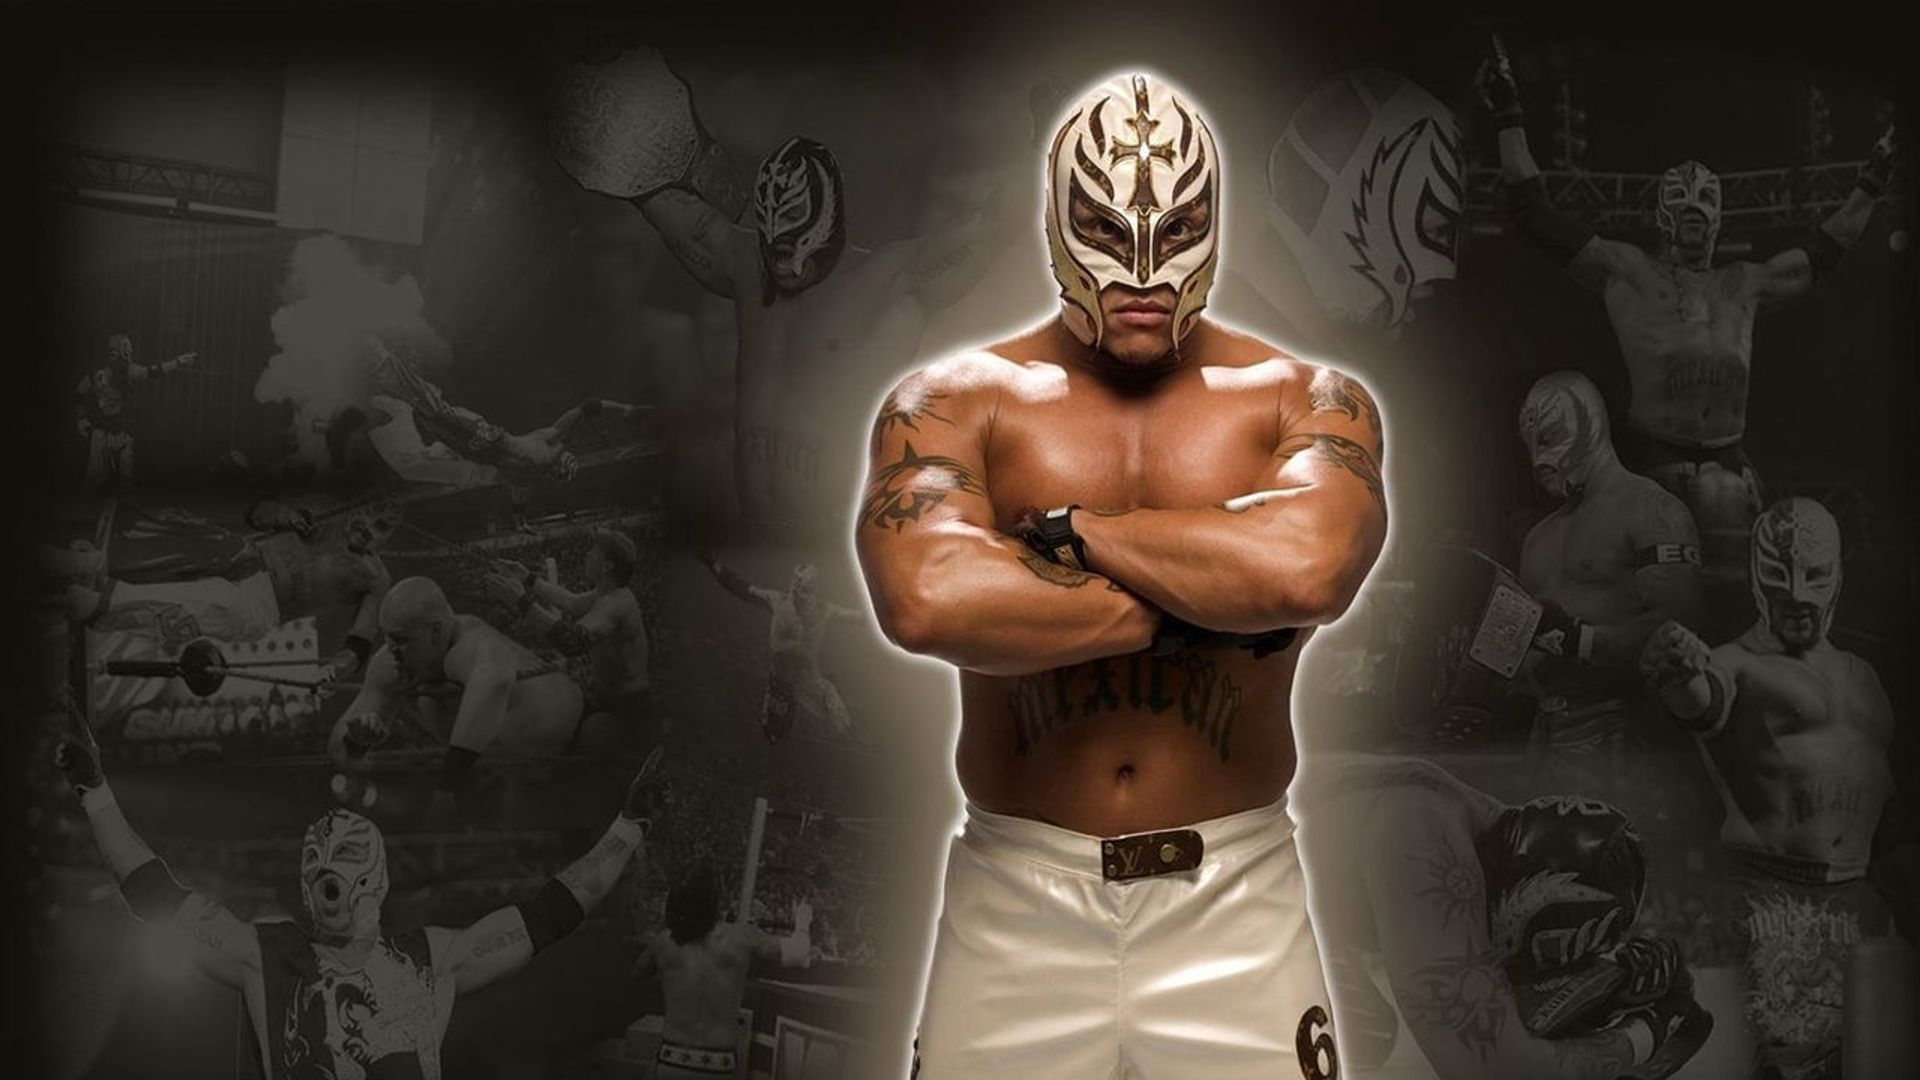 1920x1080 WWE: Rey Mysterio The Life of a Masked Man (2012) Where to Watch It Streaming Online | Reelgood